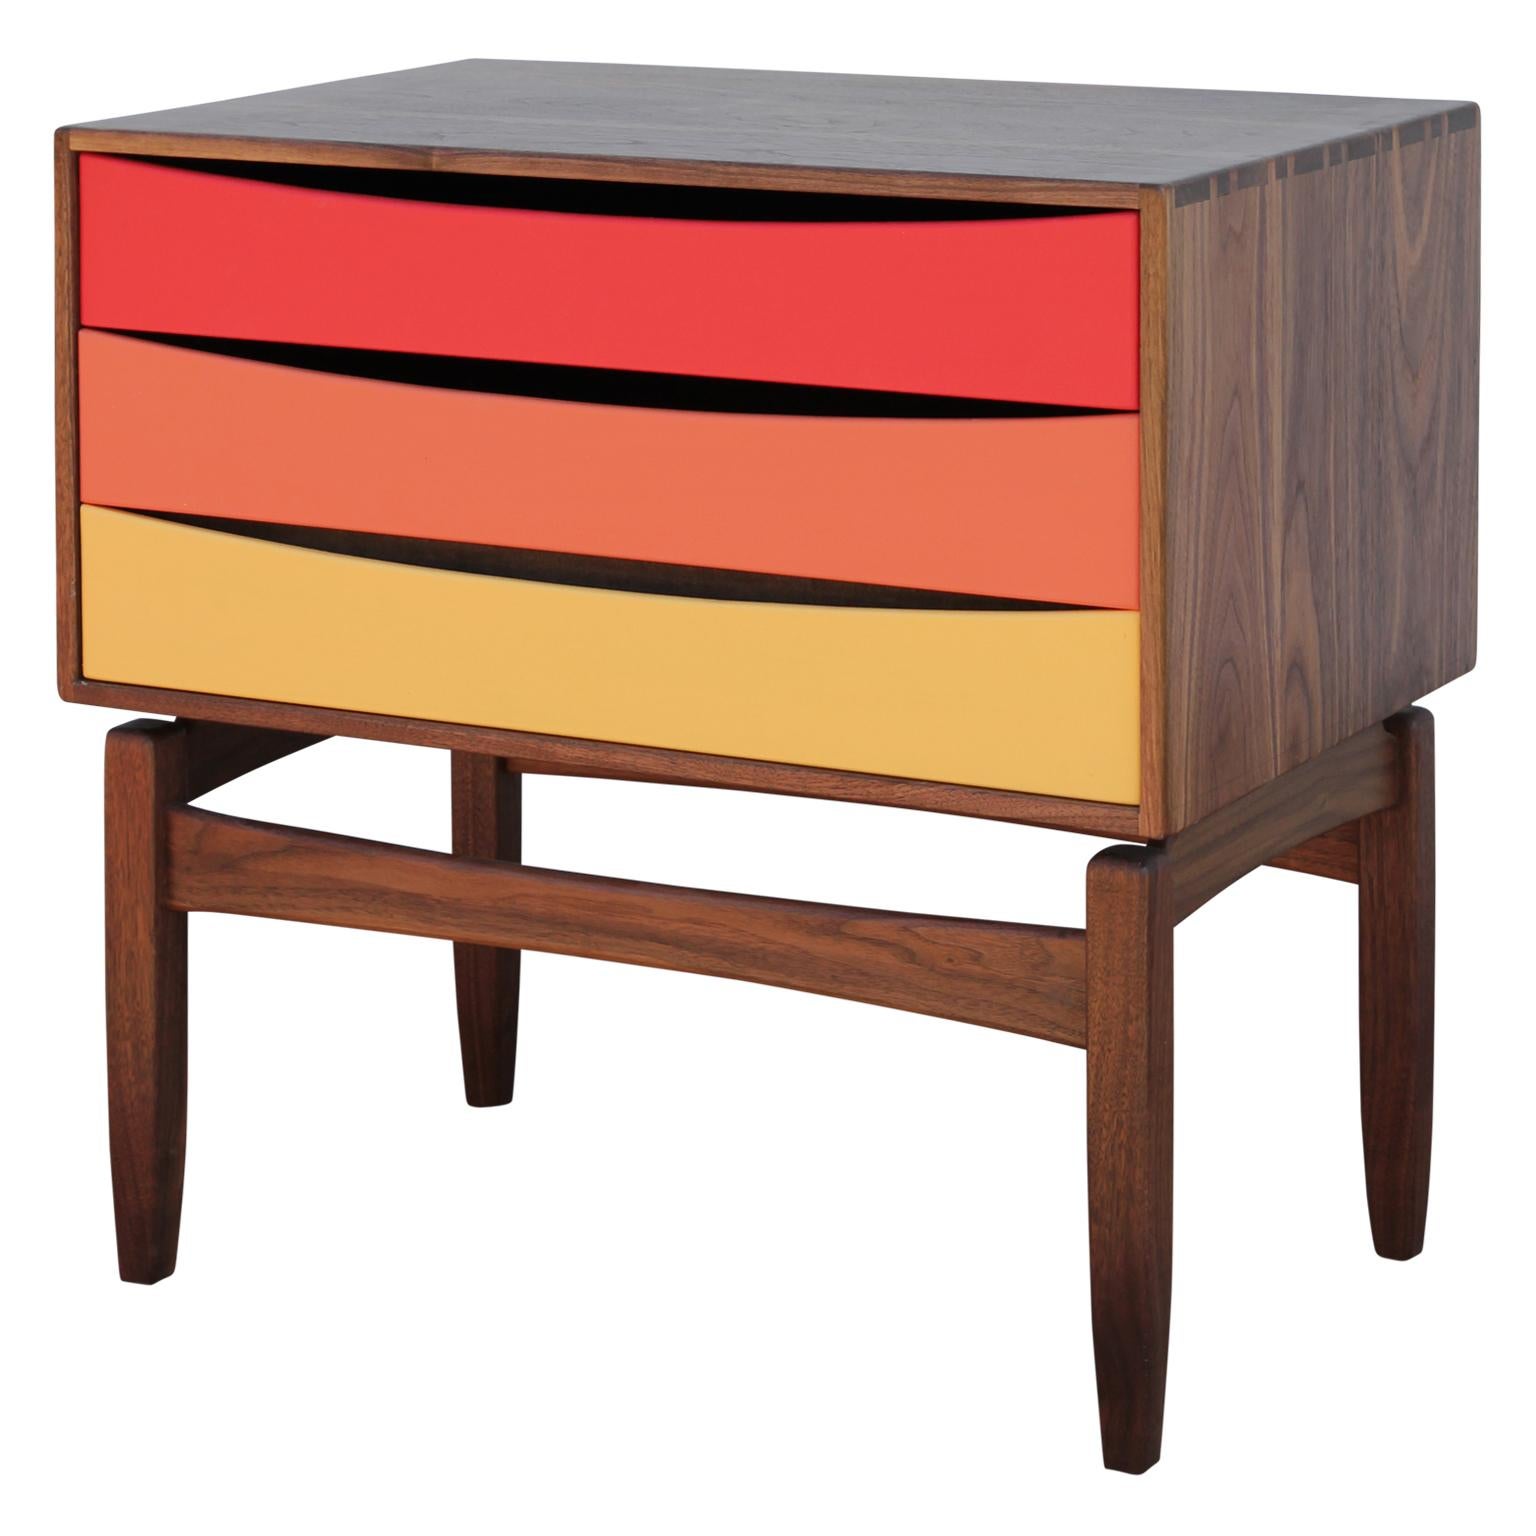 Custom three-drawer floating side table or nightstand by Norm Stoeker. The drawers are painted an ombre of red, orange and yellow and have a dovetail joint to the top. The wooden case is solid walnut. Features a rich grain and beautiful hand hewn